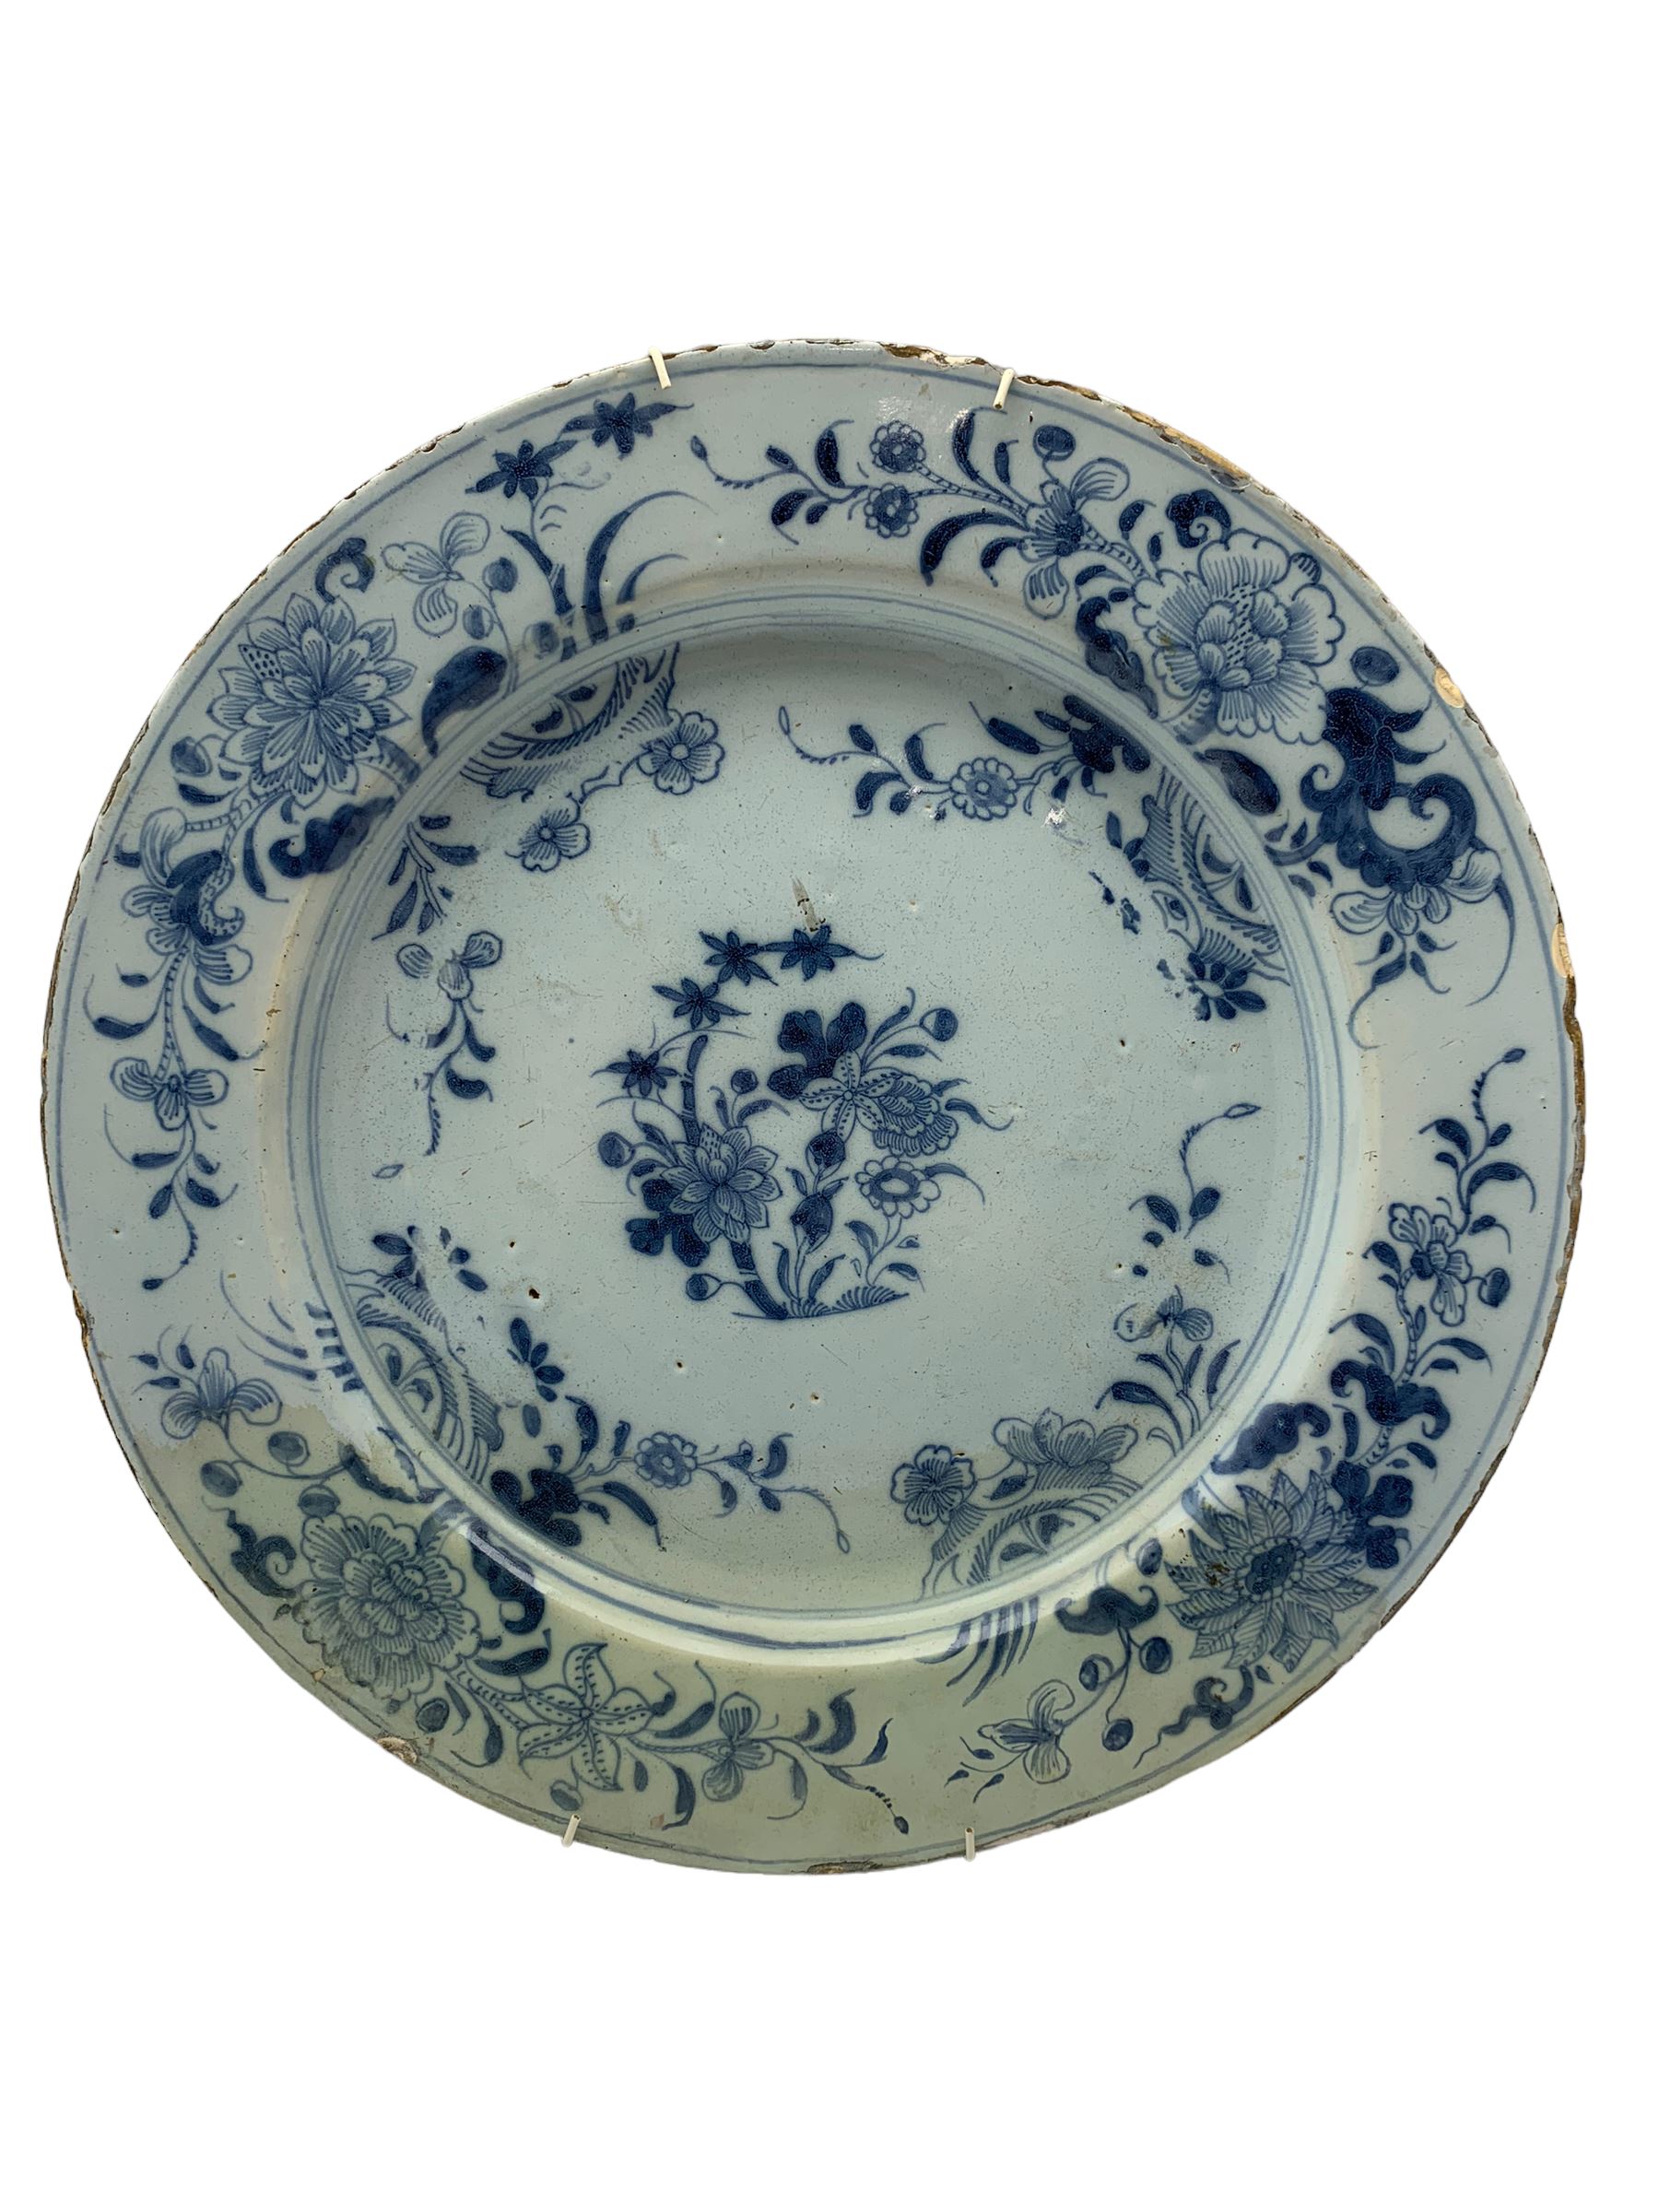 Two18th century Delft chargers and plate - Image 2 of 7